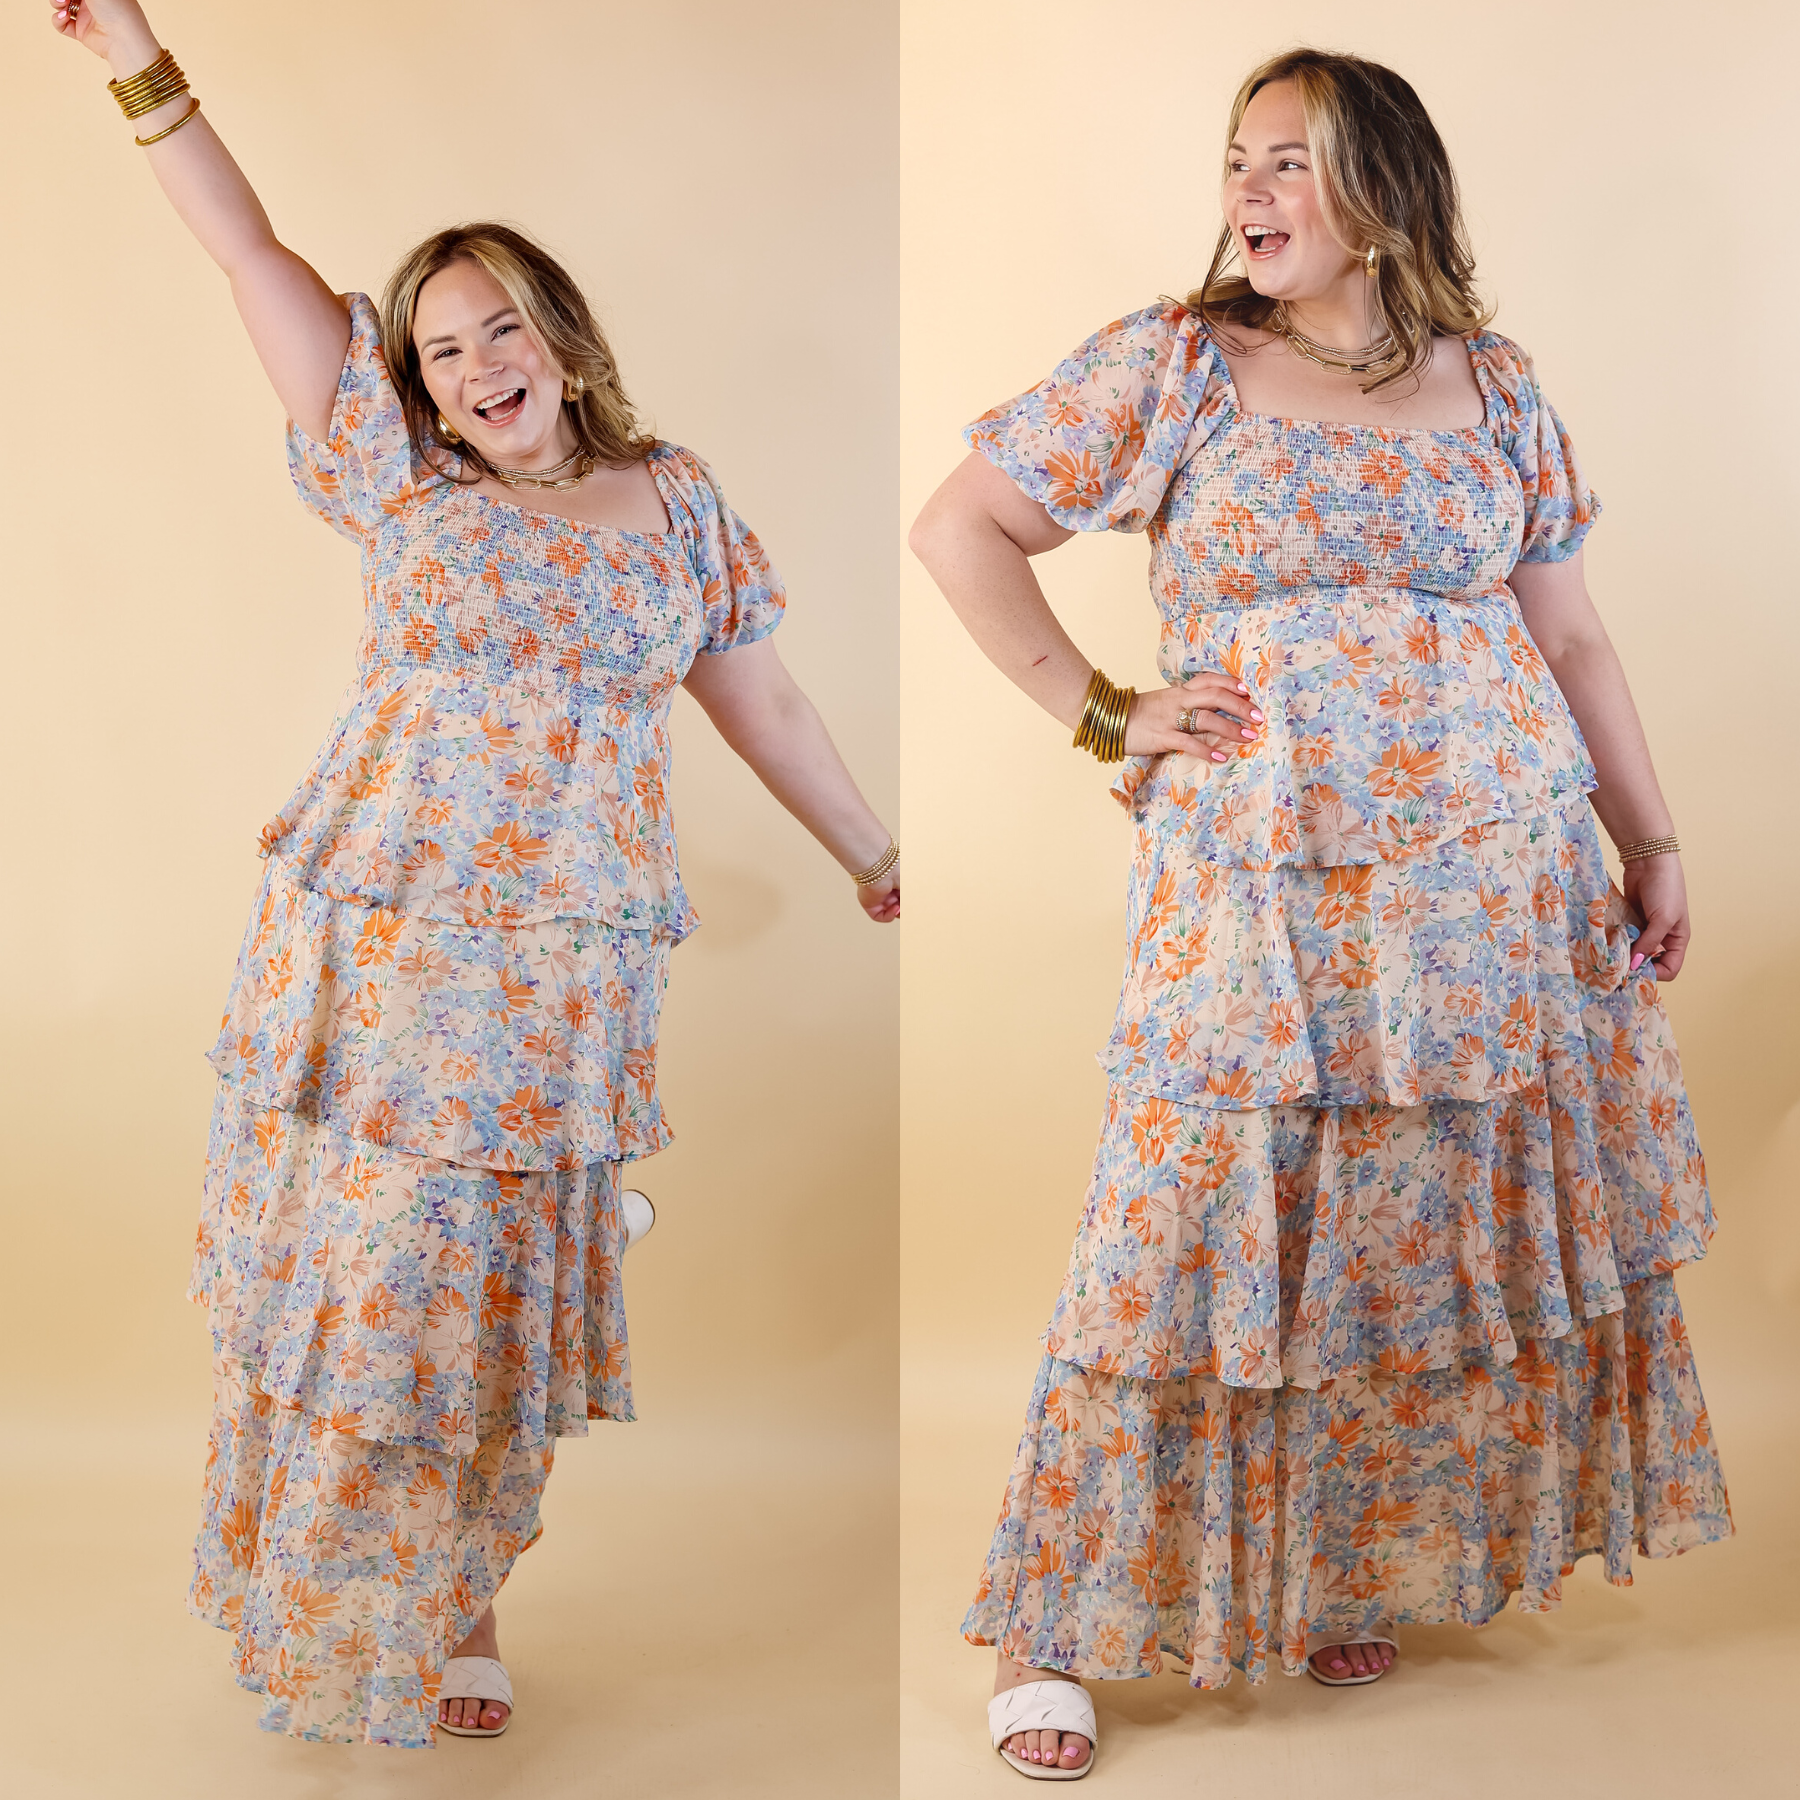 Fun Feeling Floral Tiered Maxi Dress with Smocked Balloon Sleeves in Orange Mix - Giddy Up Glamour Boutique